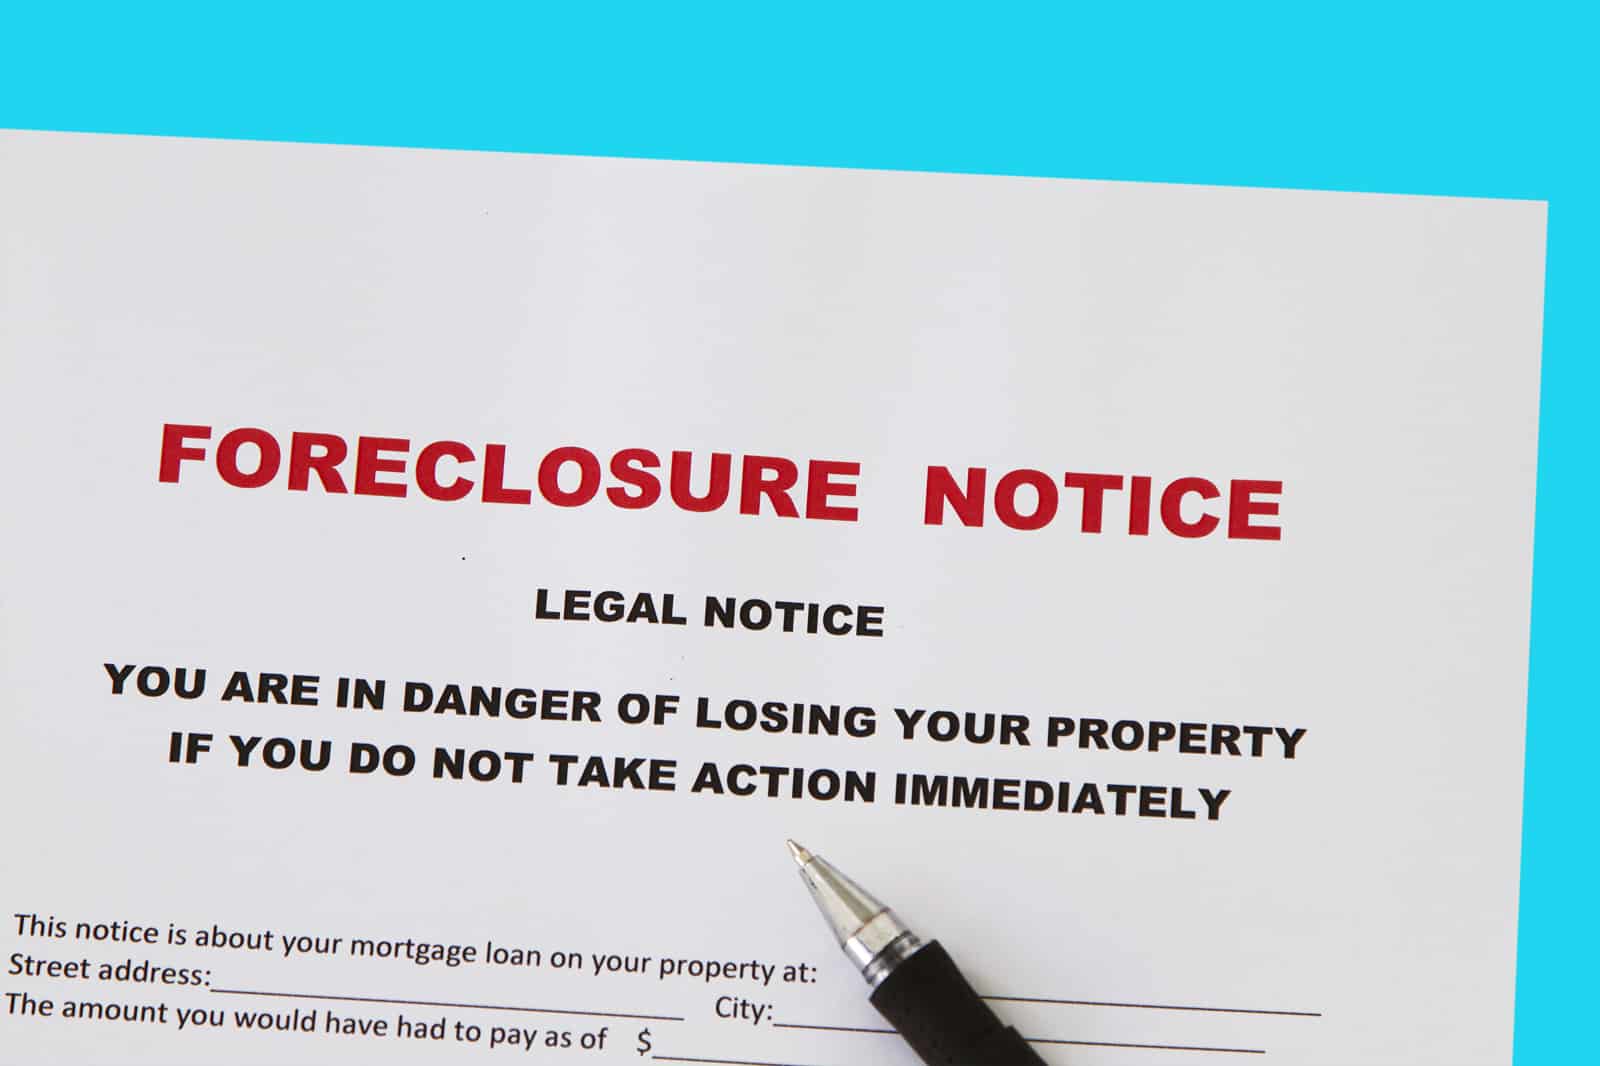 Avoid Foreclosure By Selling Your Home With Columbus Cash Homebuyers